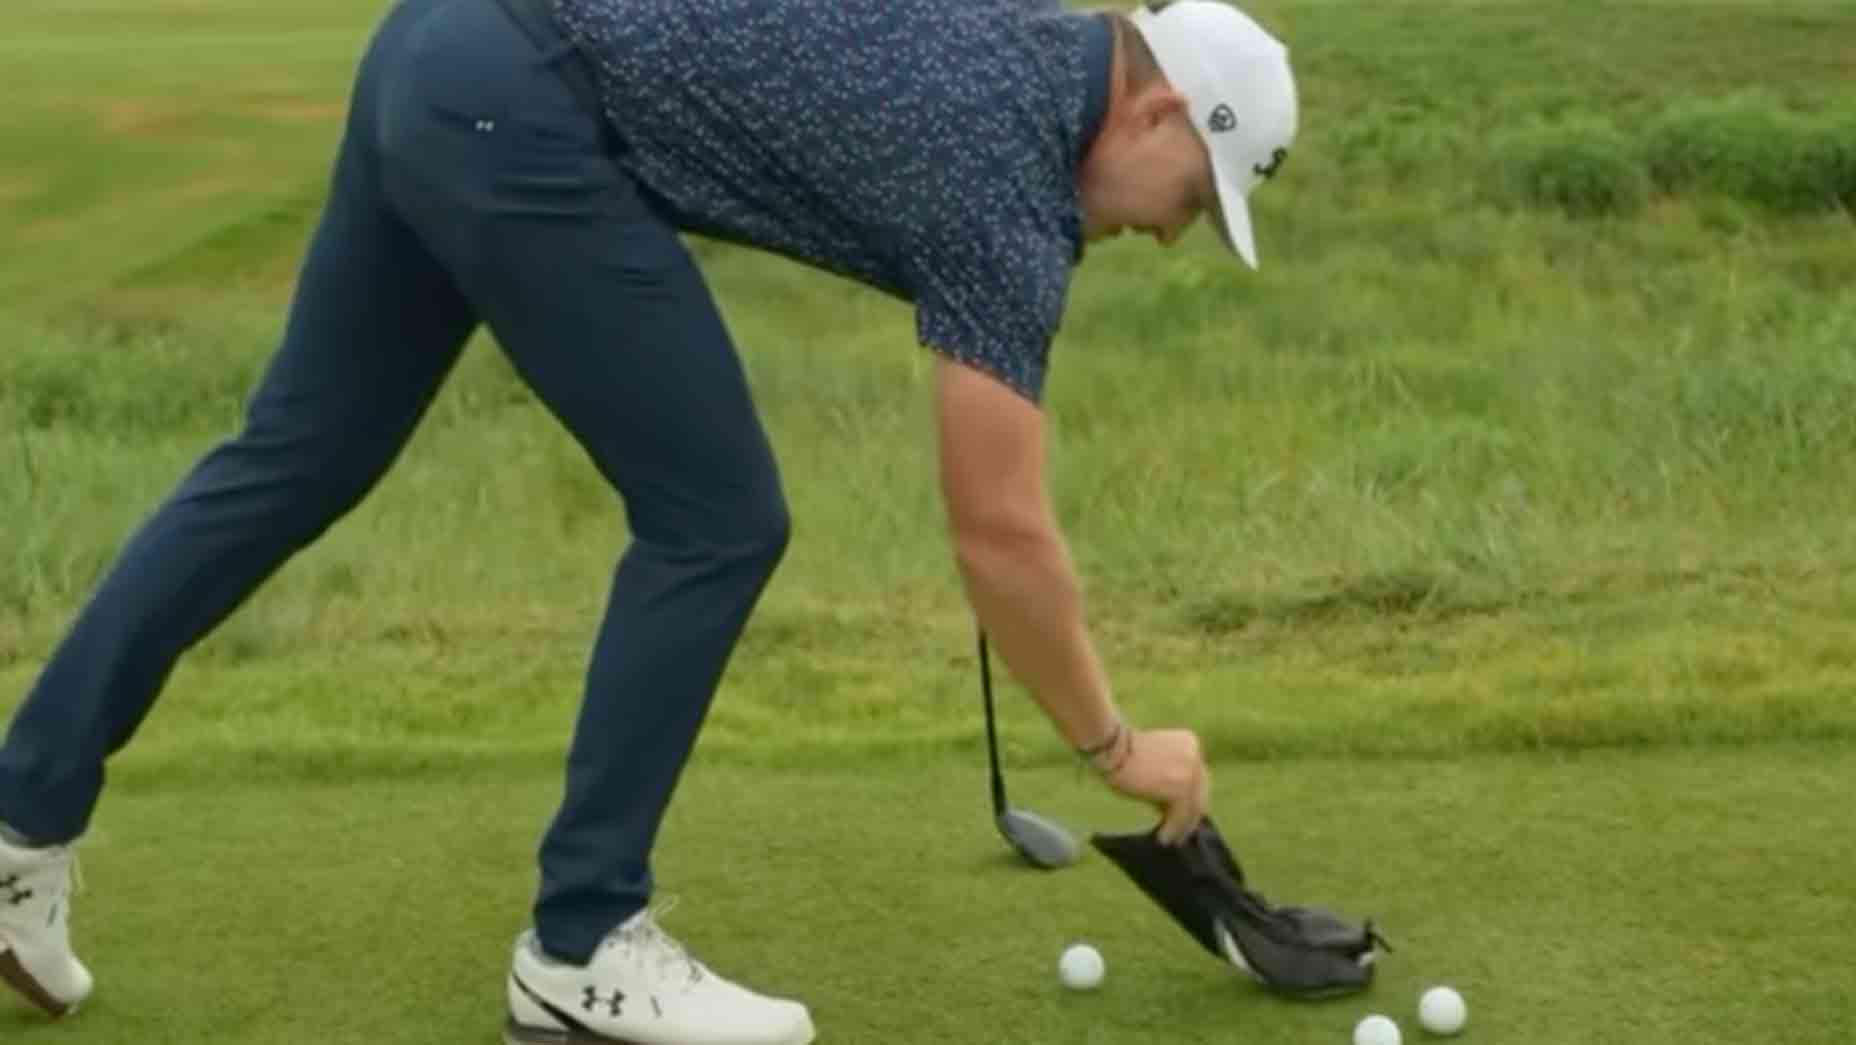 Hitting flush shots with your fairway woods is tough, so GOLF Top 100 Teacher Cameron McCormick shows an easy hack for better contact